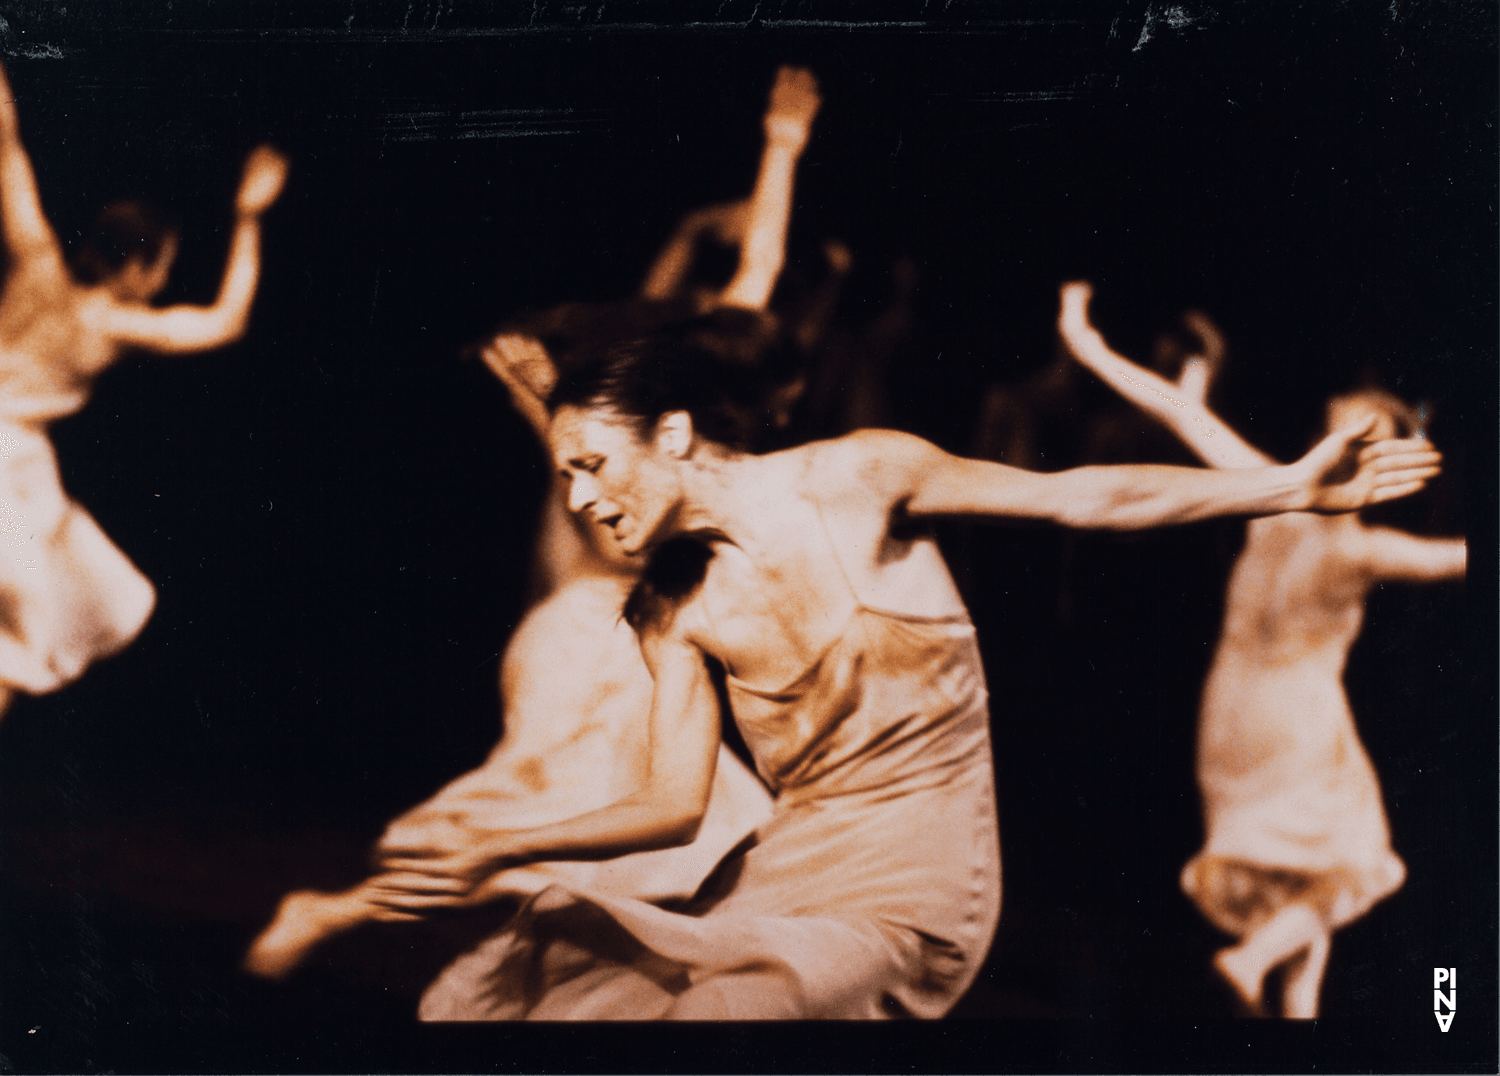 Malou Airaudo in “The Rite of Spring” by Pina Bausch